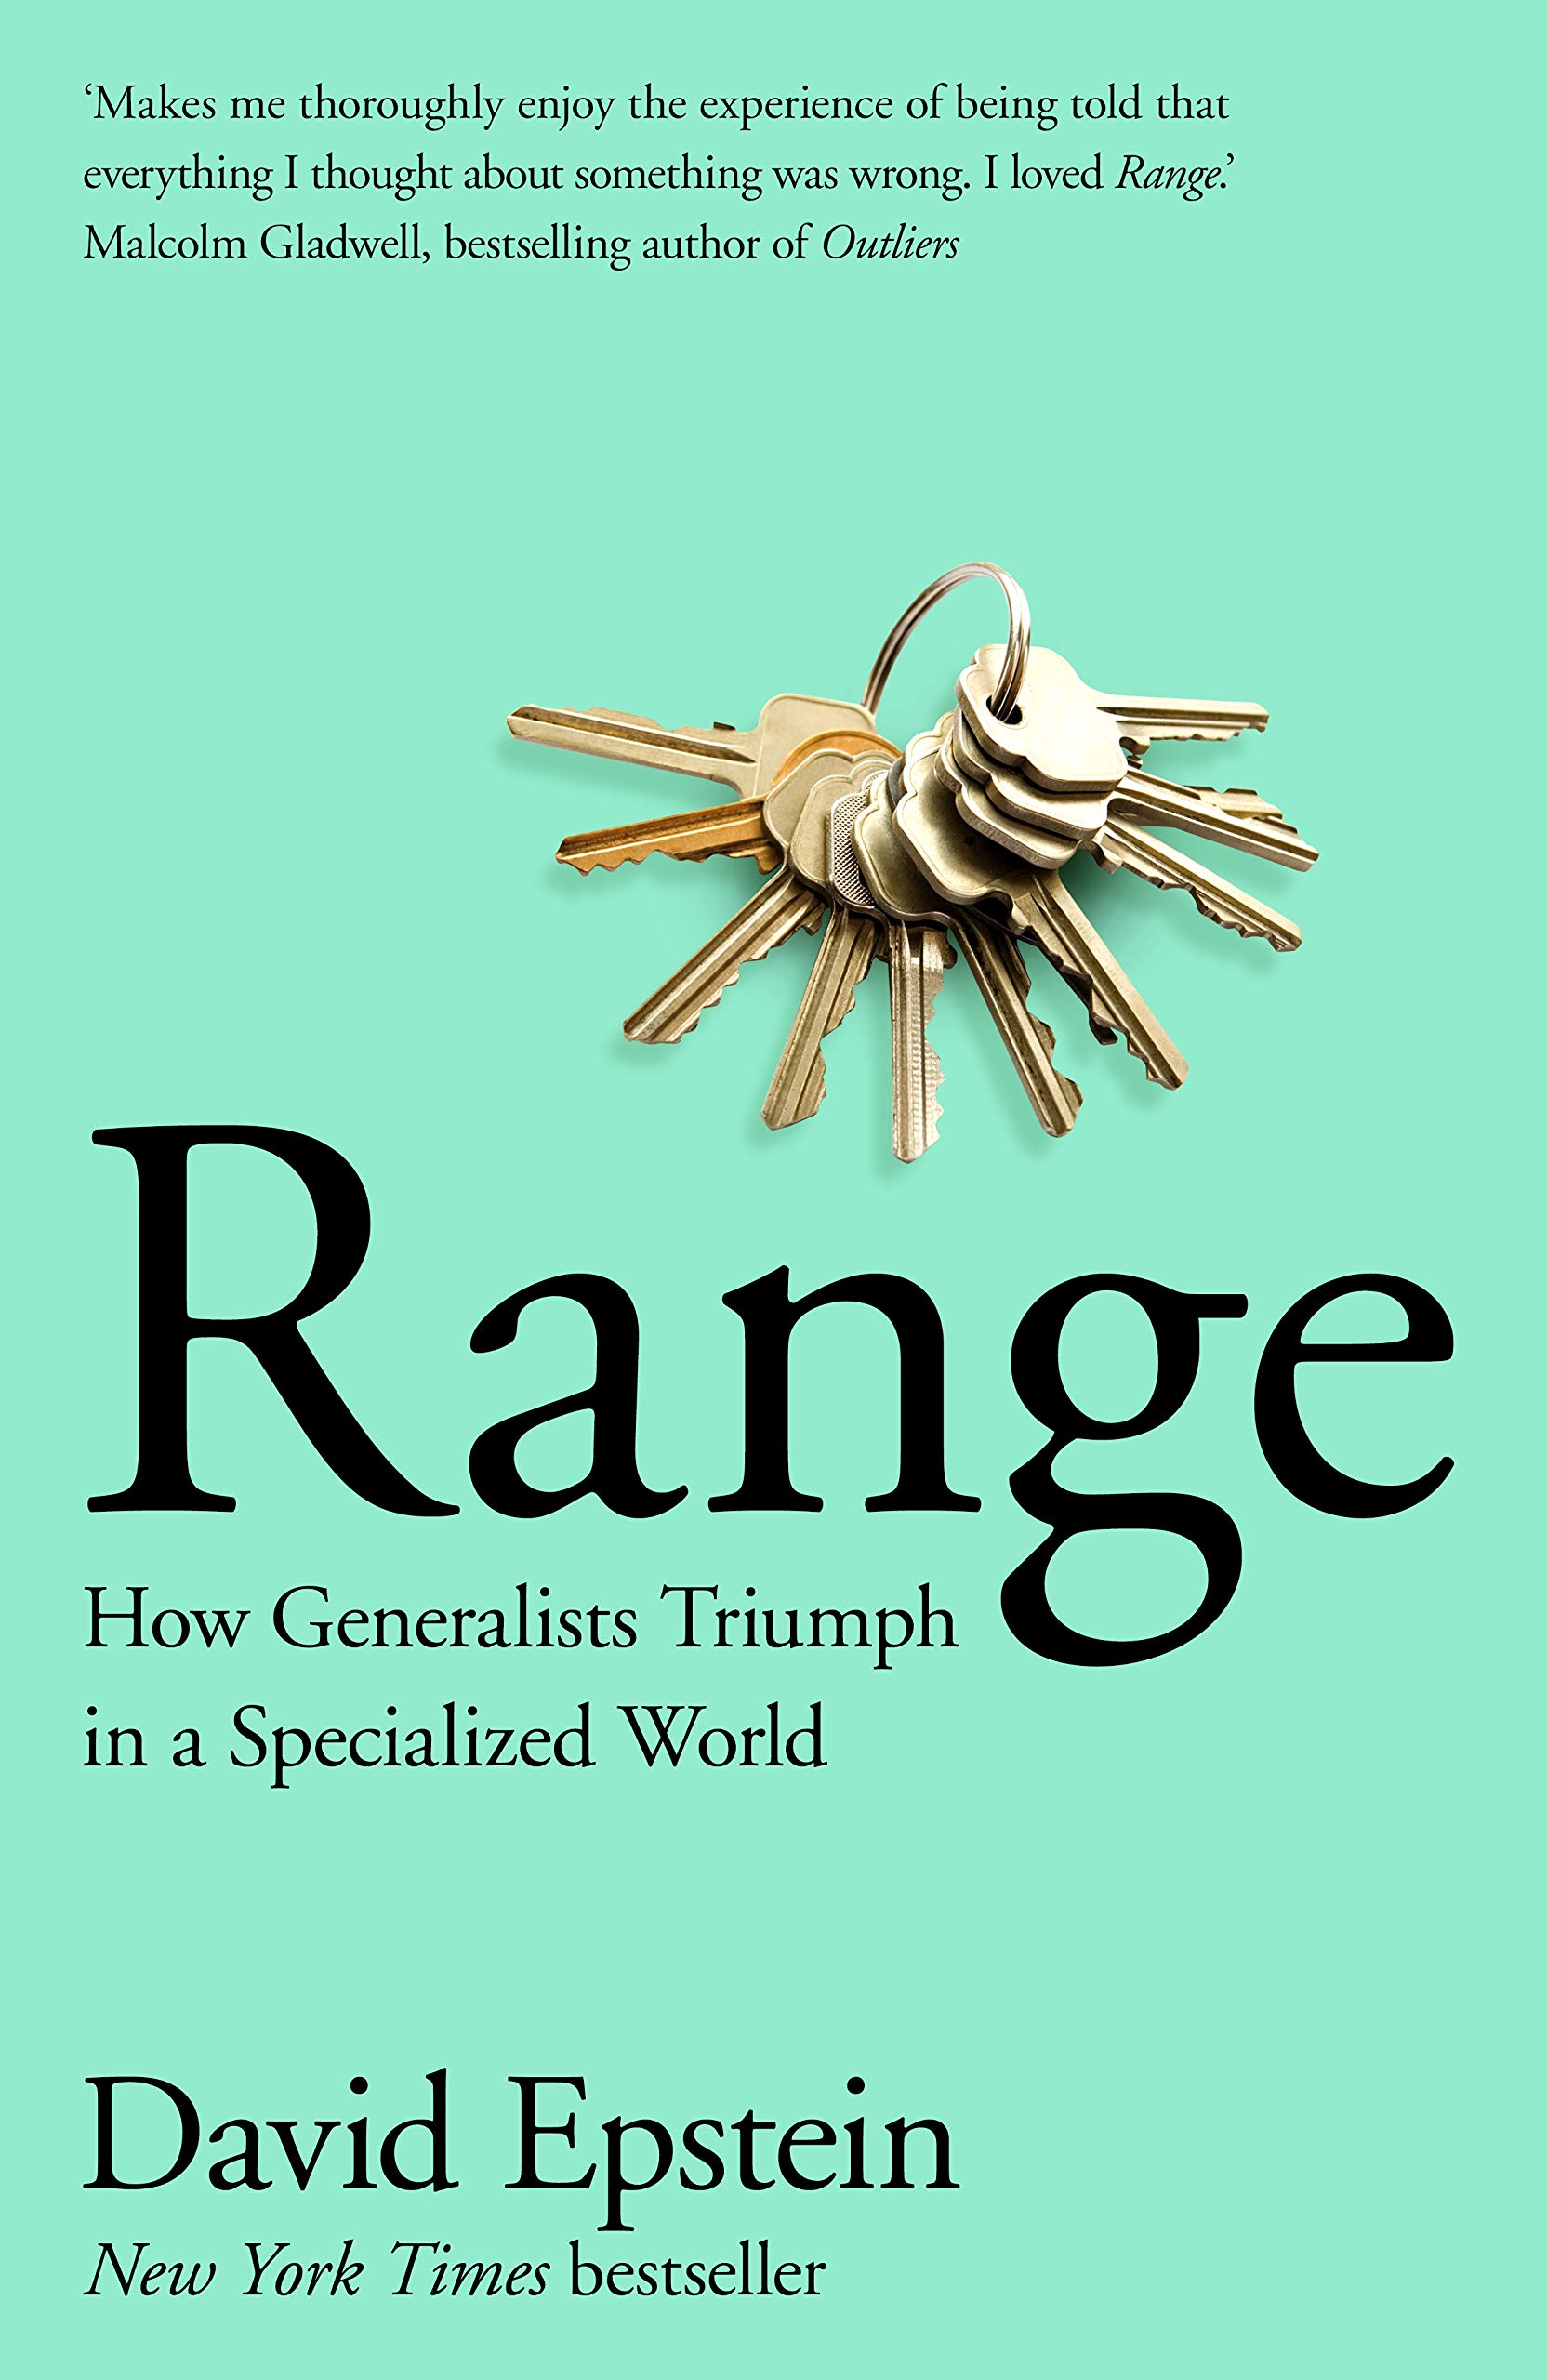 Book review: “Range – How generalists triumph in a specialized world” by David Epstein